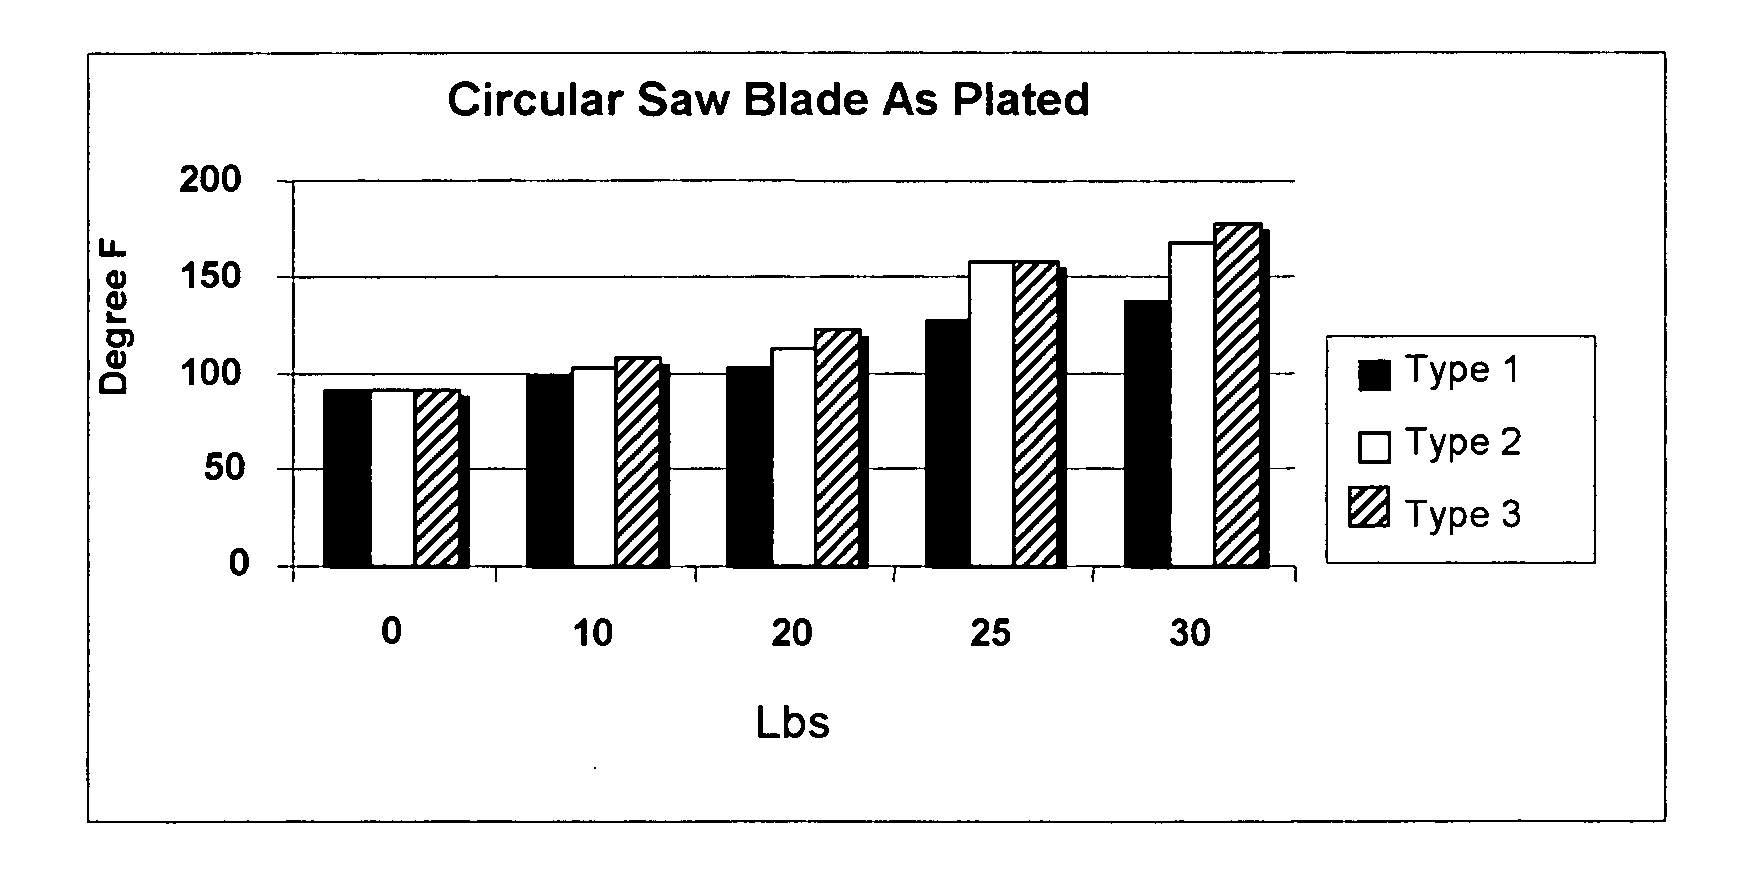 Blades coated with a nickel boron metal coating